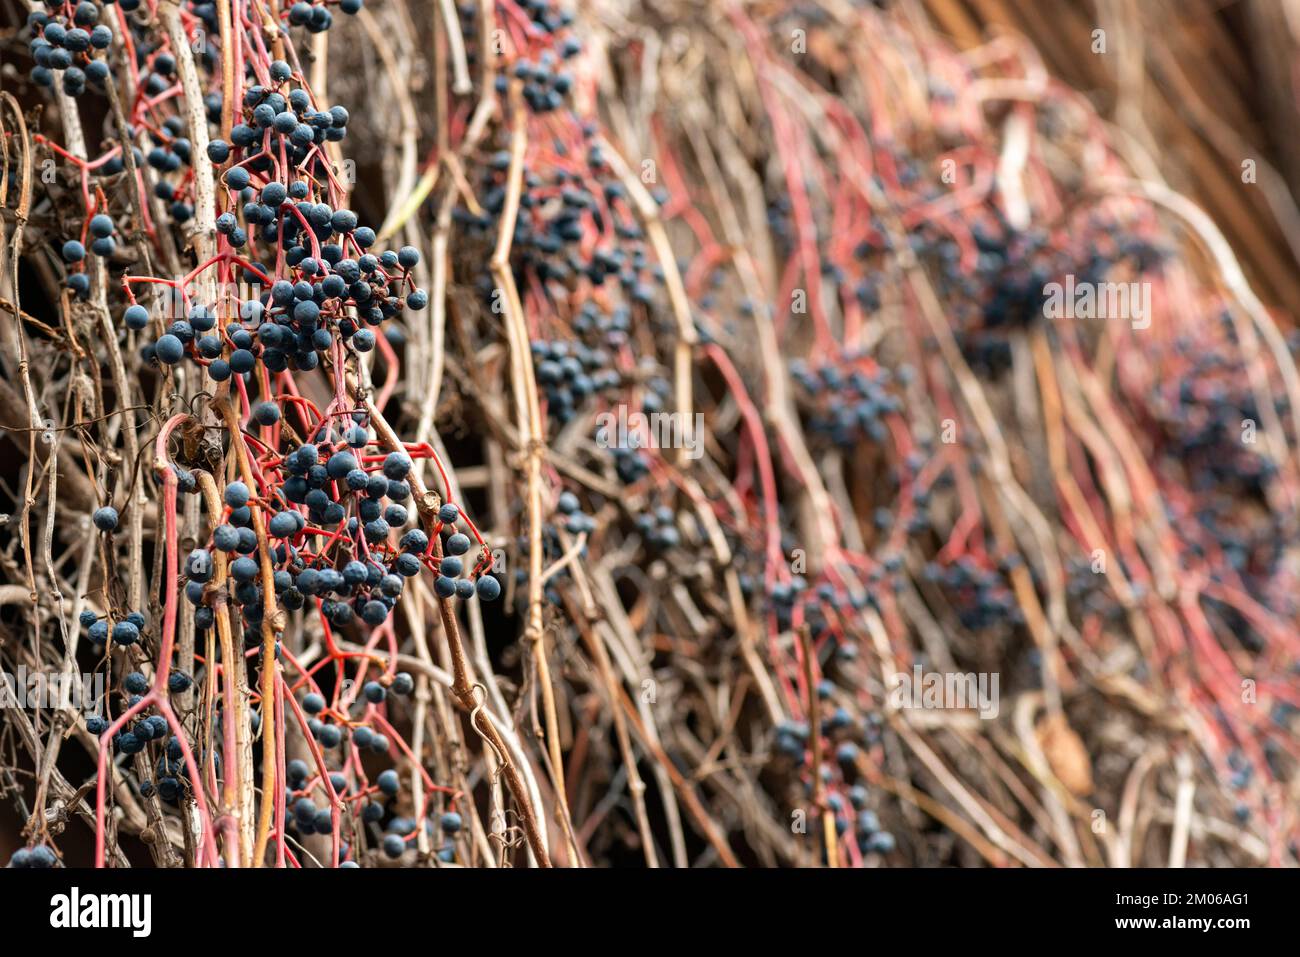 Bunches of wild red grapes among dry vines weaving along the wall Stock Photo